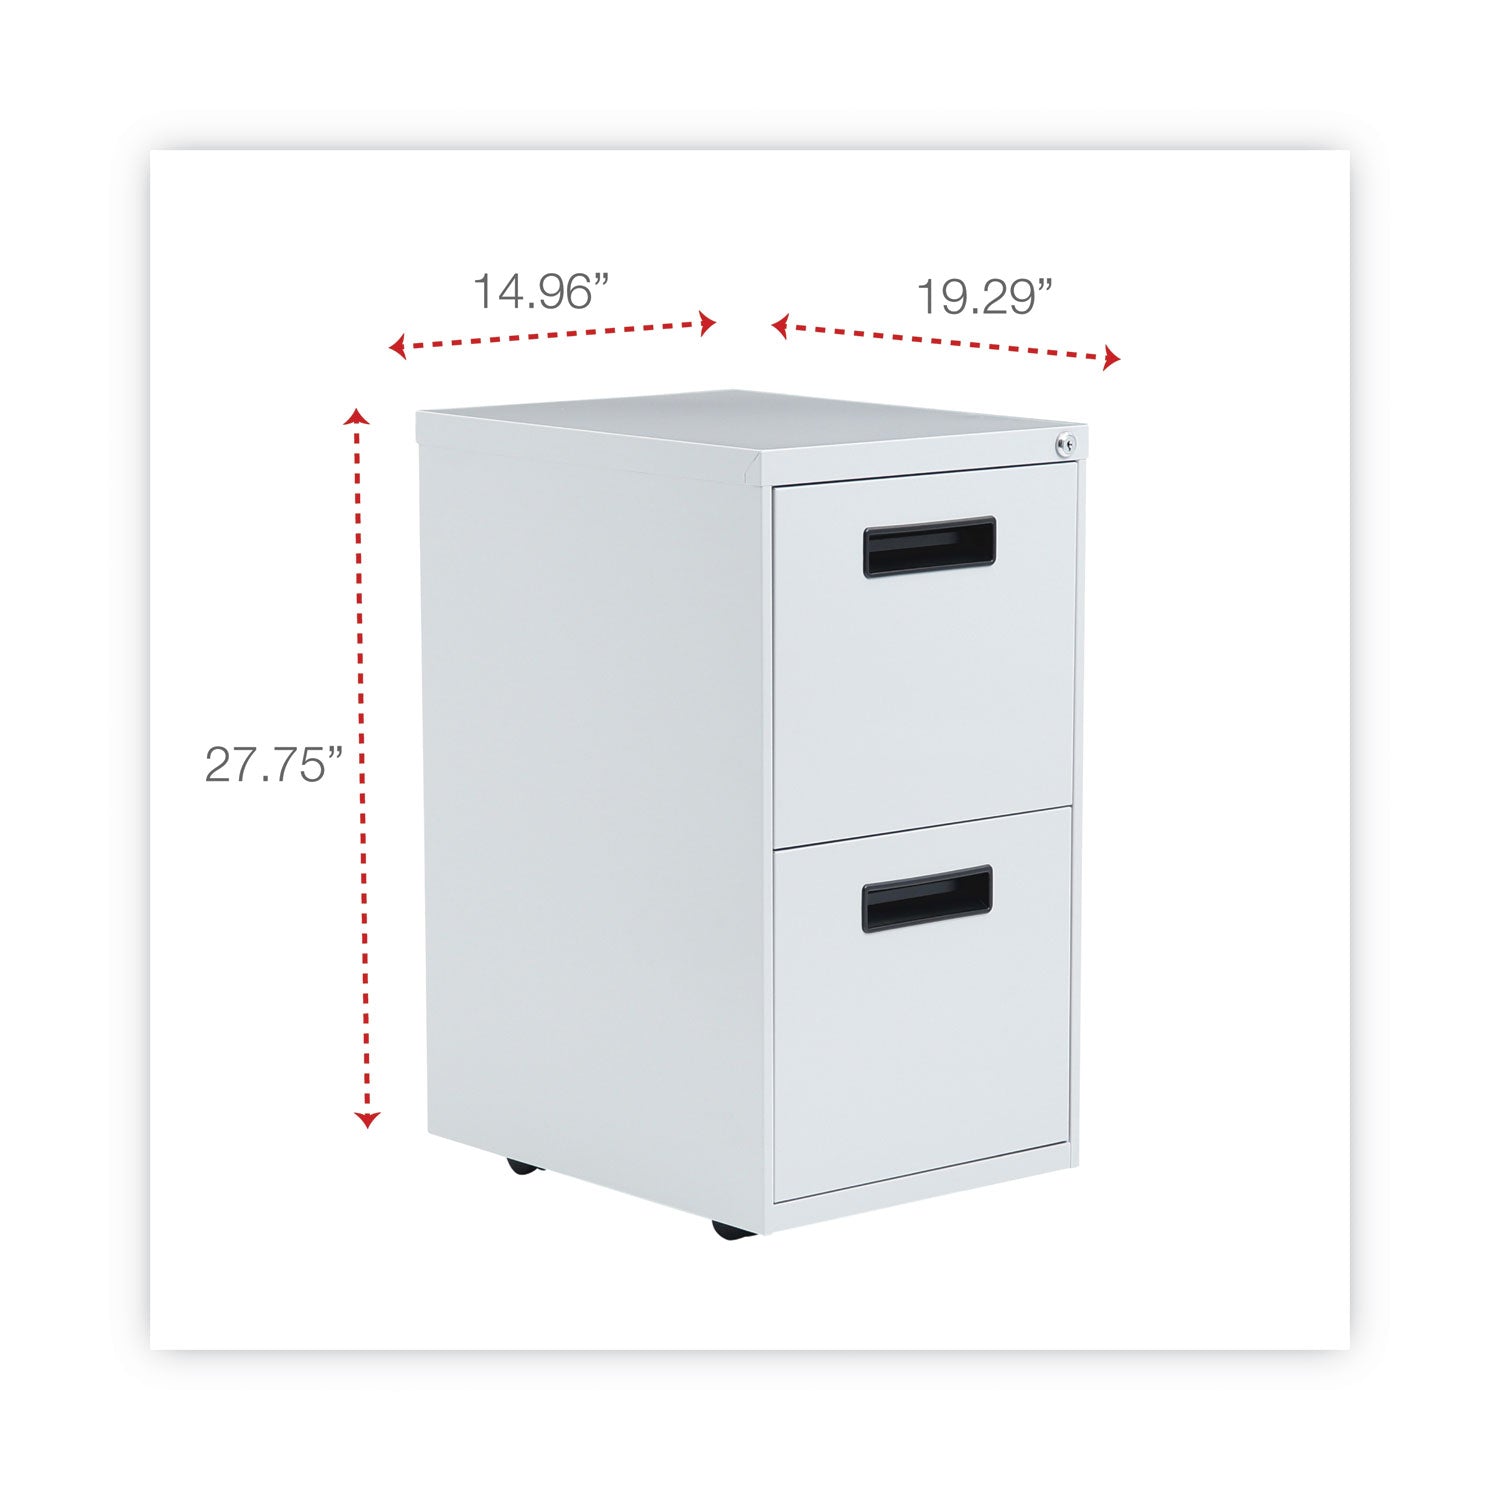 file-pedestal-left-or-right-2-legal-letter-size-file-drawers-light-gray-1496-x-1929-x-2775_alepafflg - 3